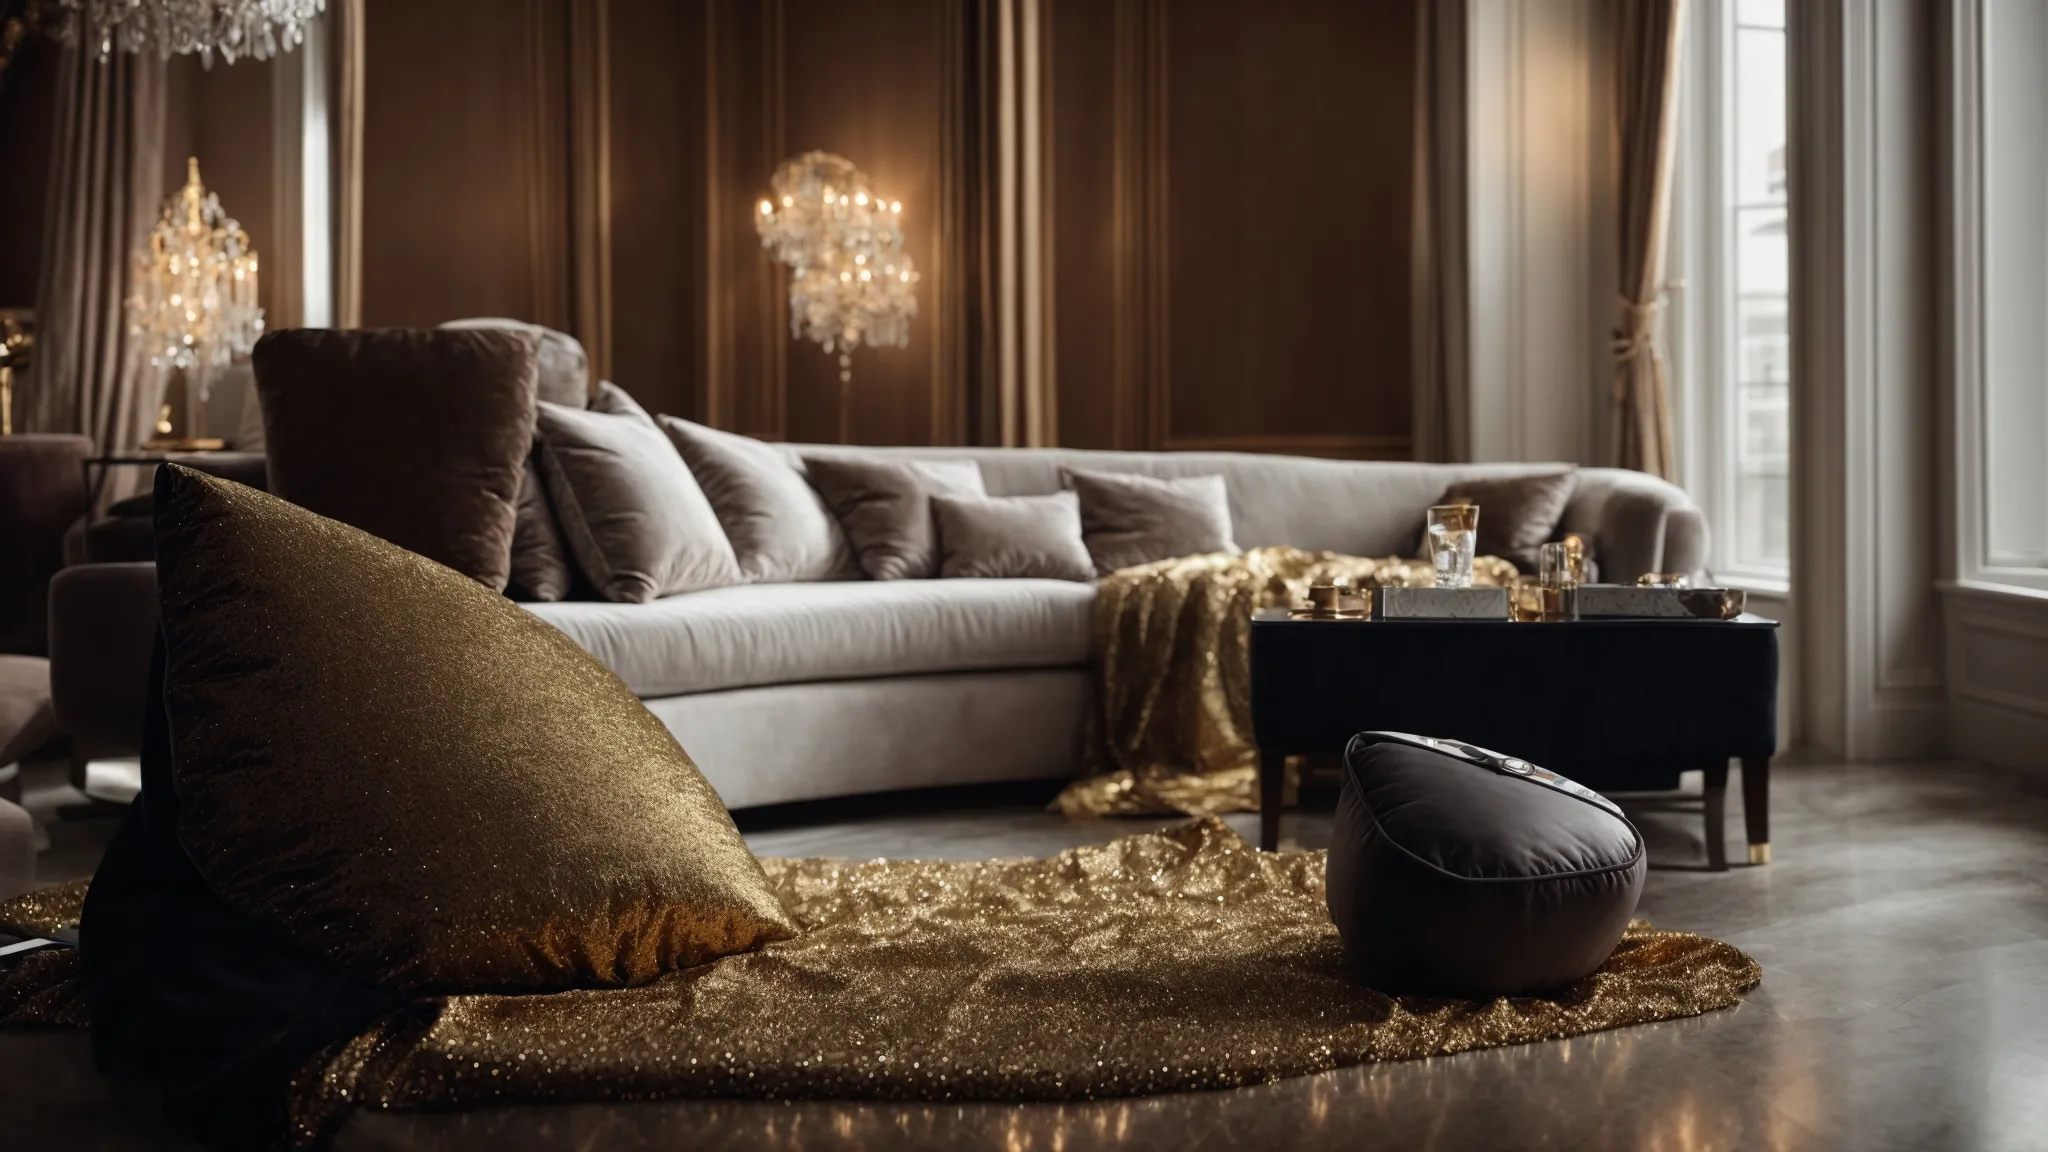 a luxurious room with a velvet cushion displaying a gleaming ipad encrusted with diamonds while someone captures the scene with a professional camera.